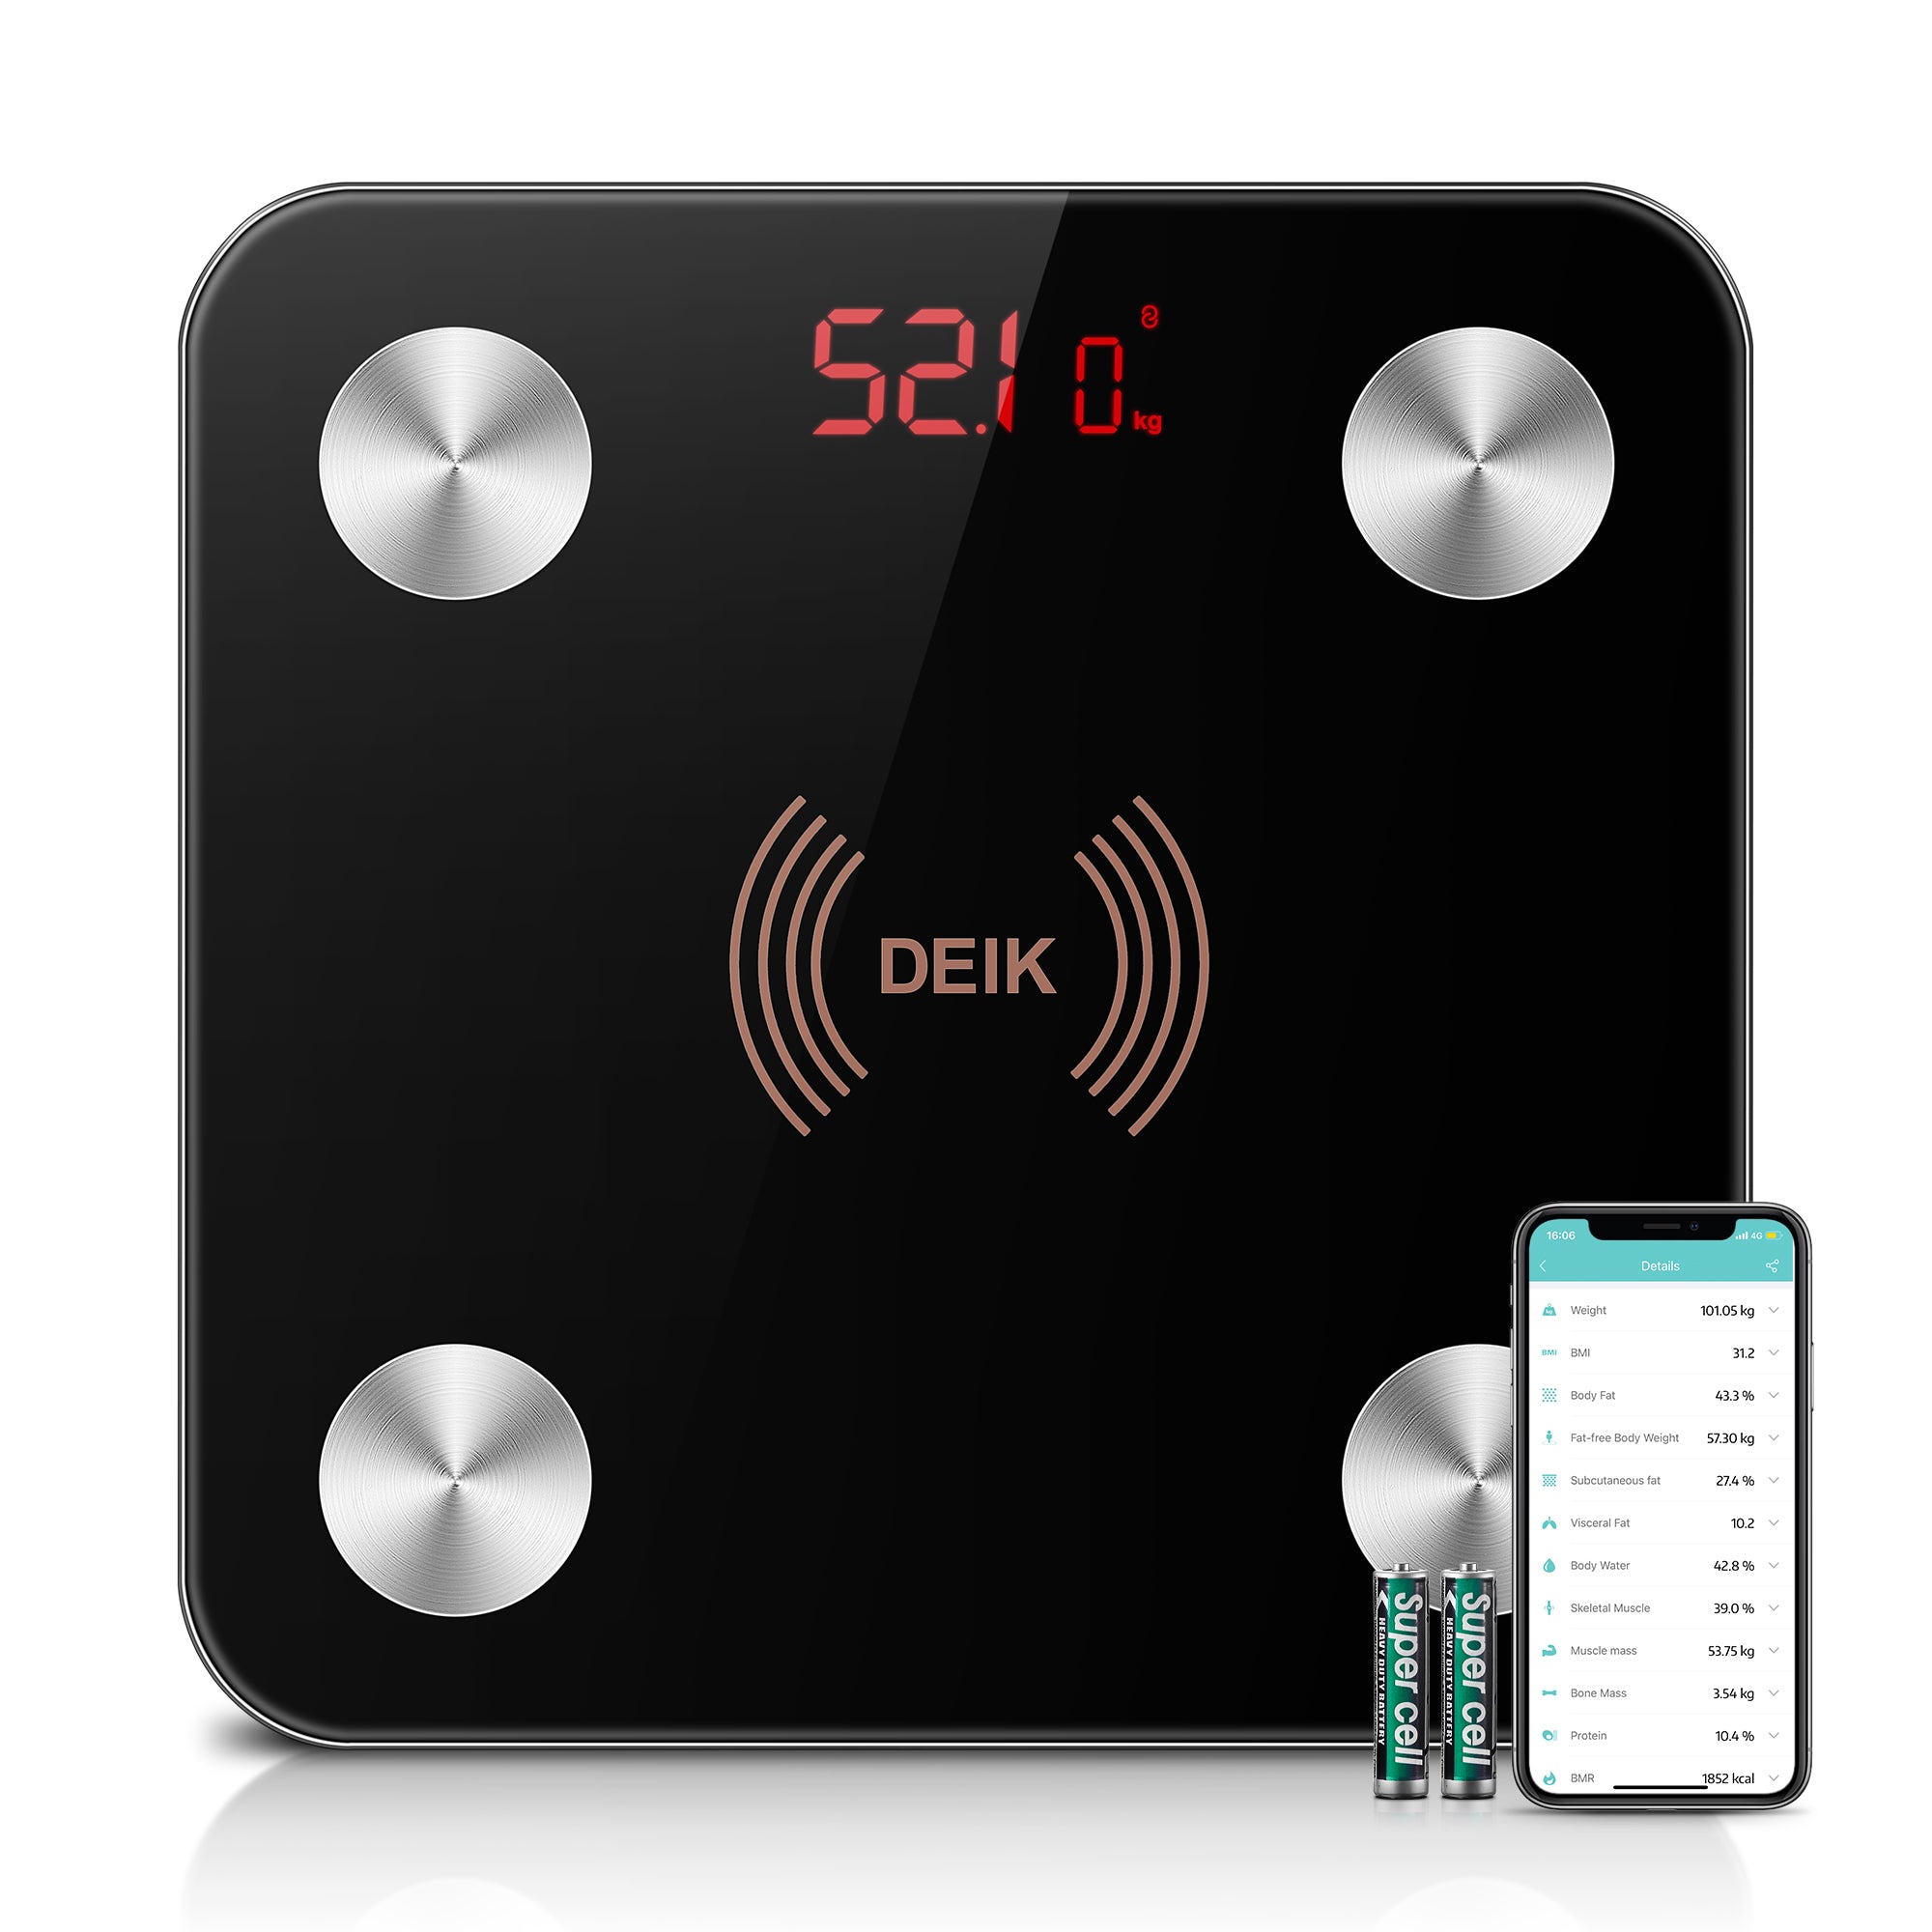 DEIK Smart Digital Body Fat Scale, White Bluetooth Bathroom Scale, with iOS  and Android APP, 180kg/400lb High Precision Measurement, Detects 13 Data